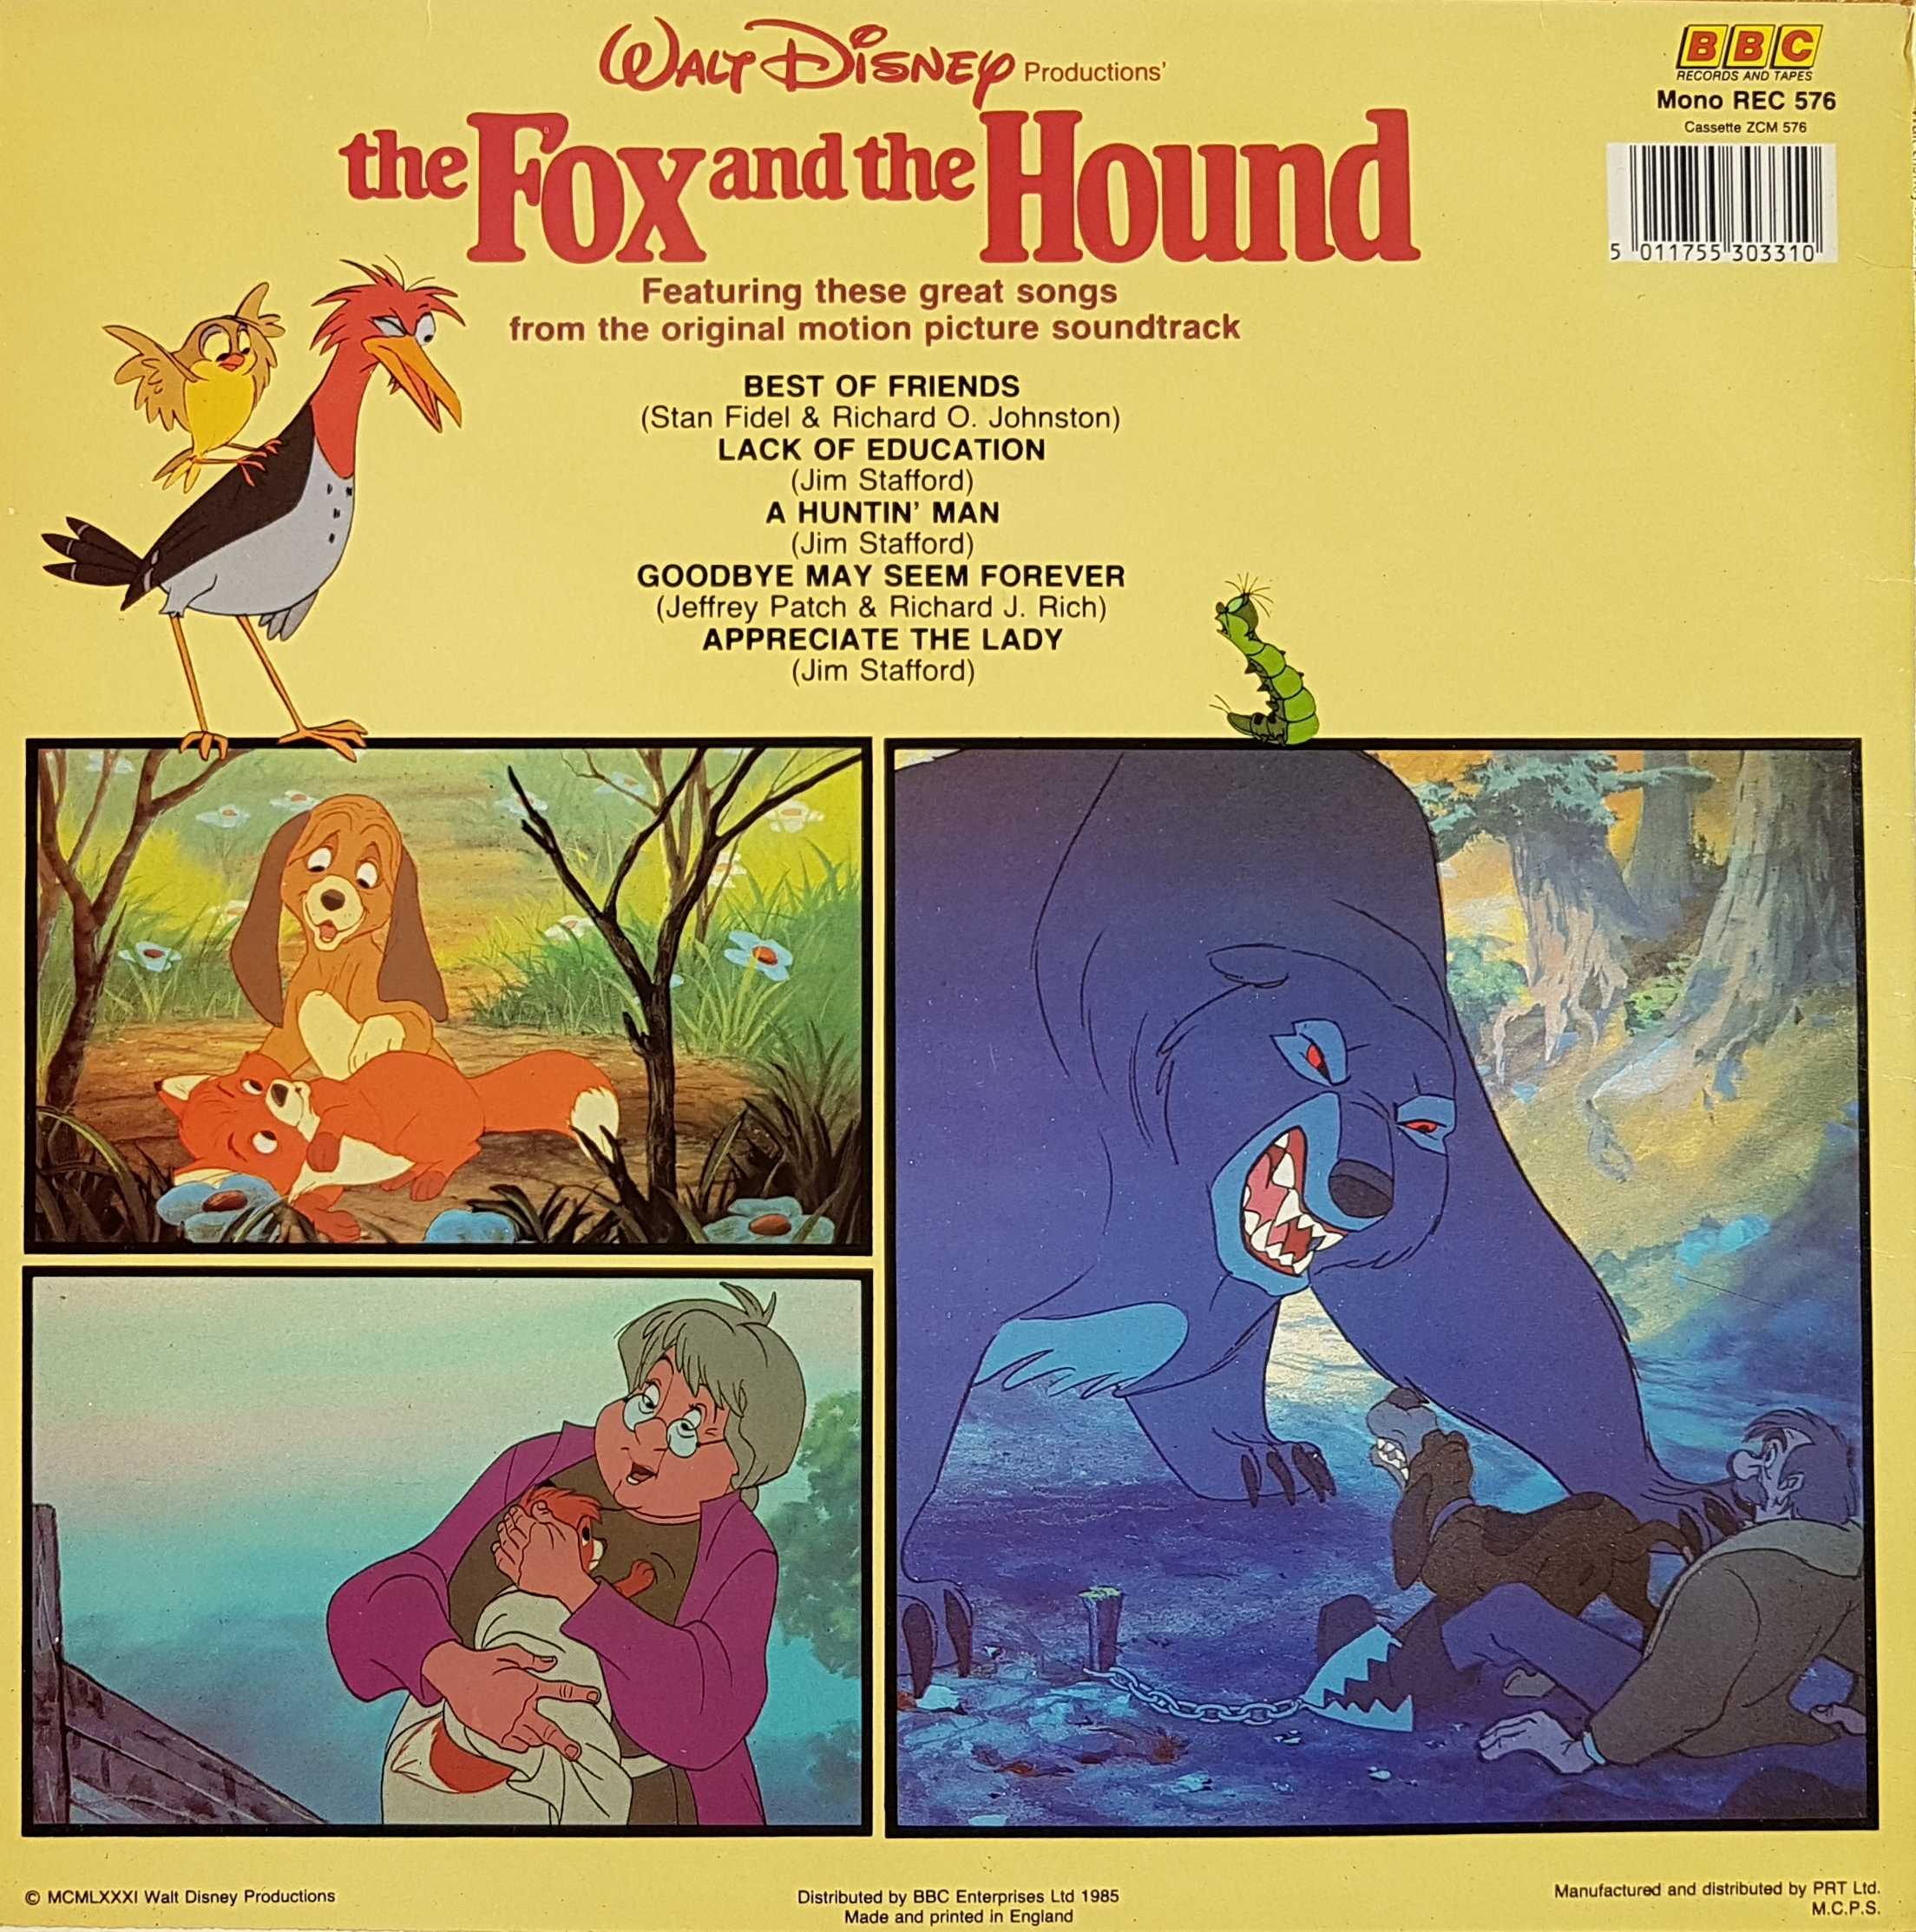 Picture of REC 576 The fox and the hound by artist Various from the BBC records and Tapes library